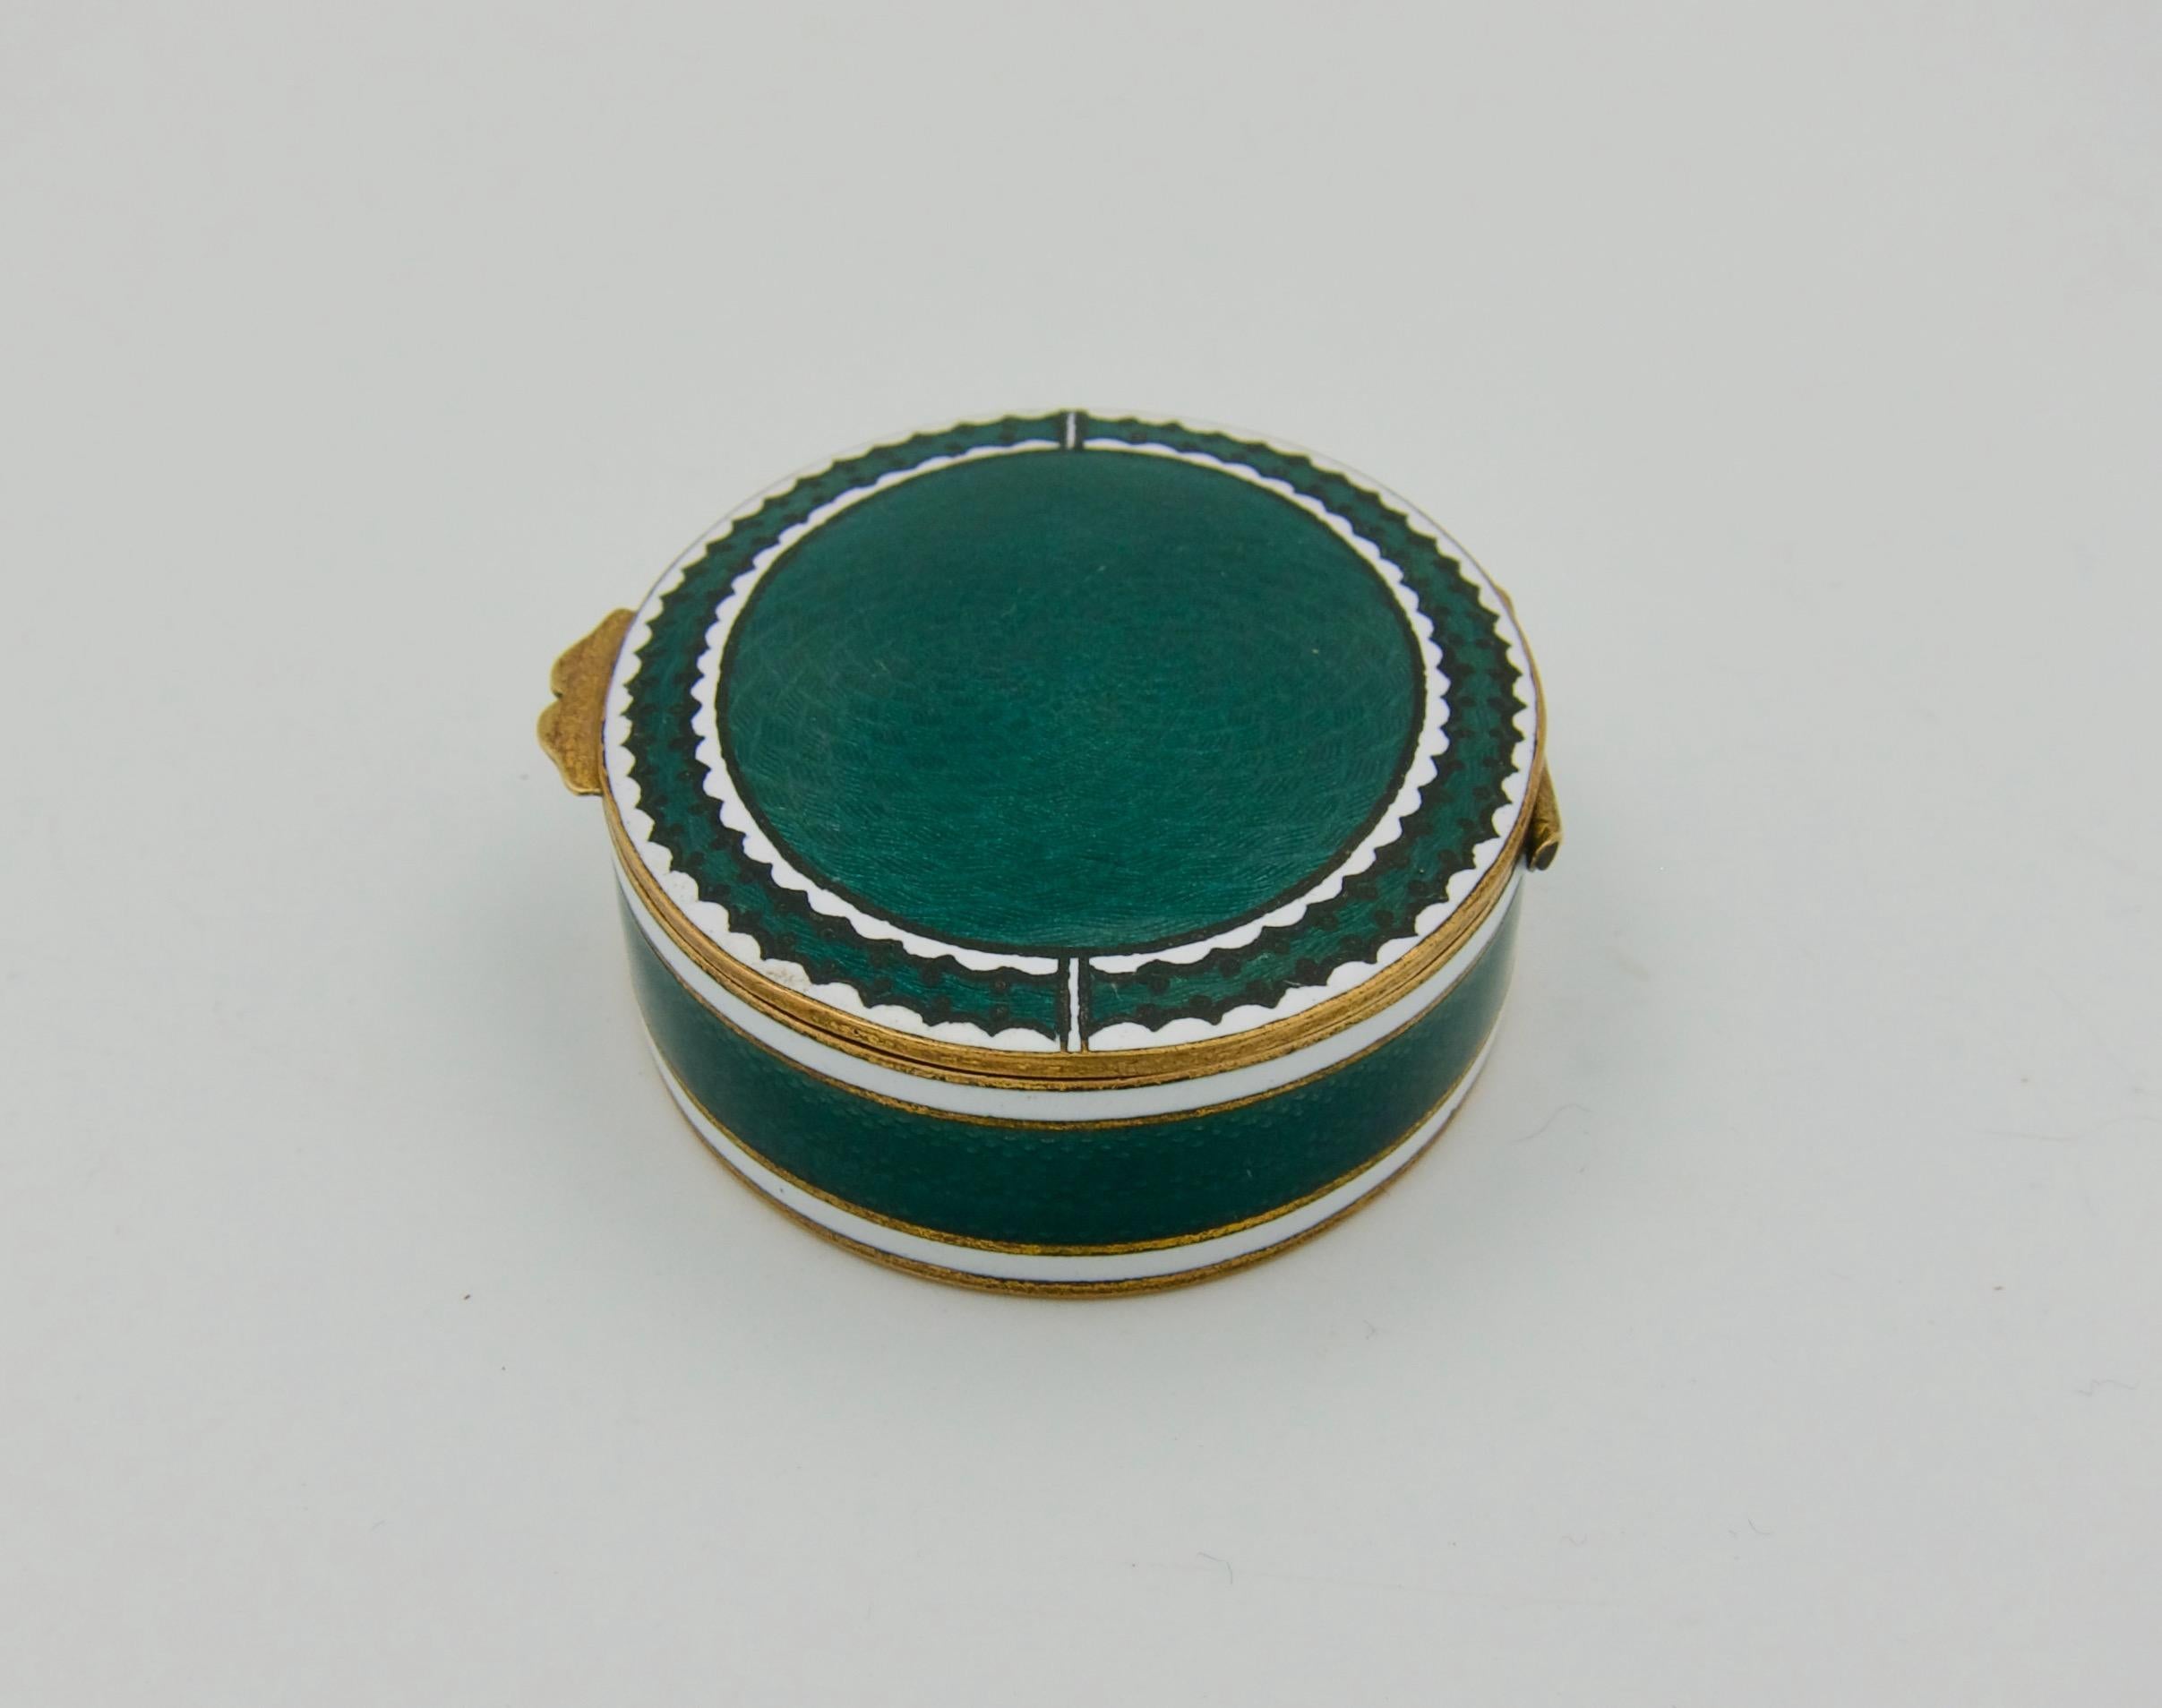 20th Century Antique Gilt Metal and Guilloche Enamel Snuff or Pill Box